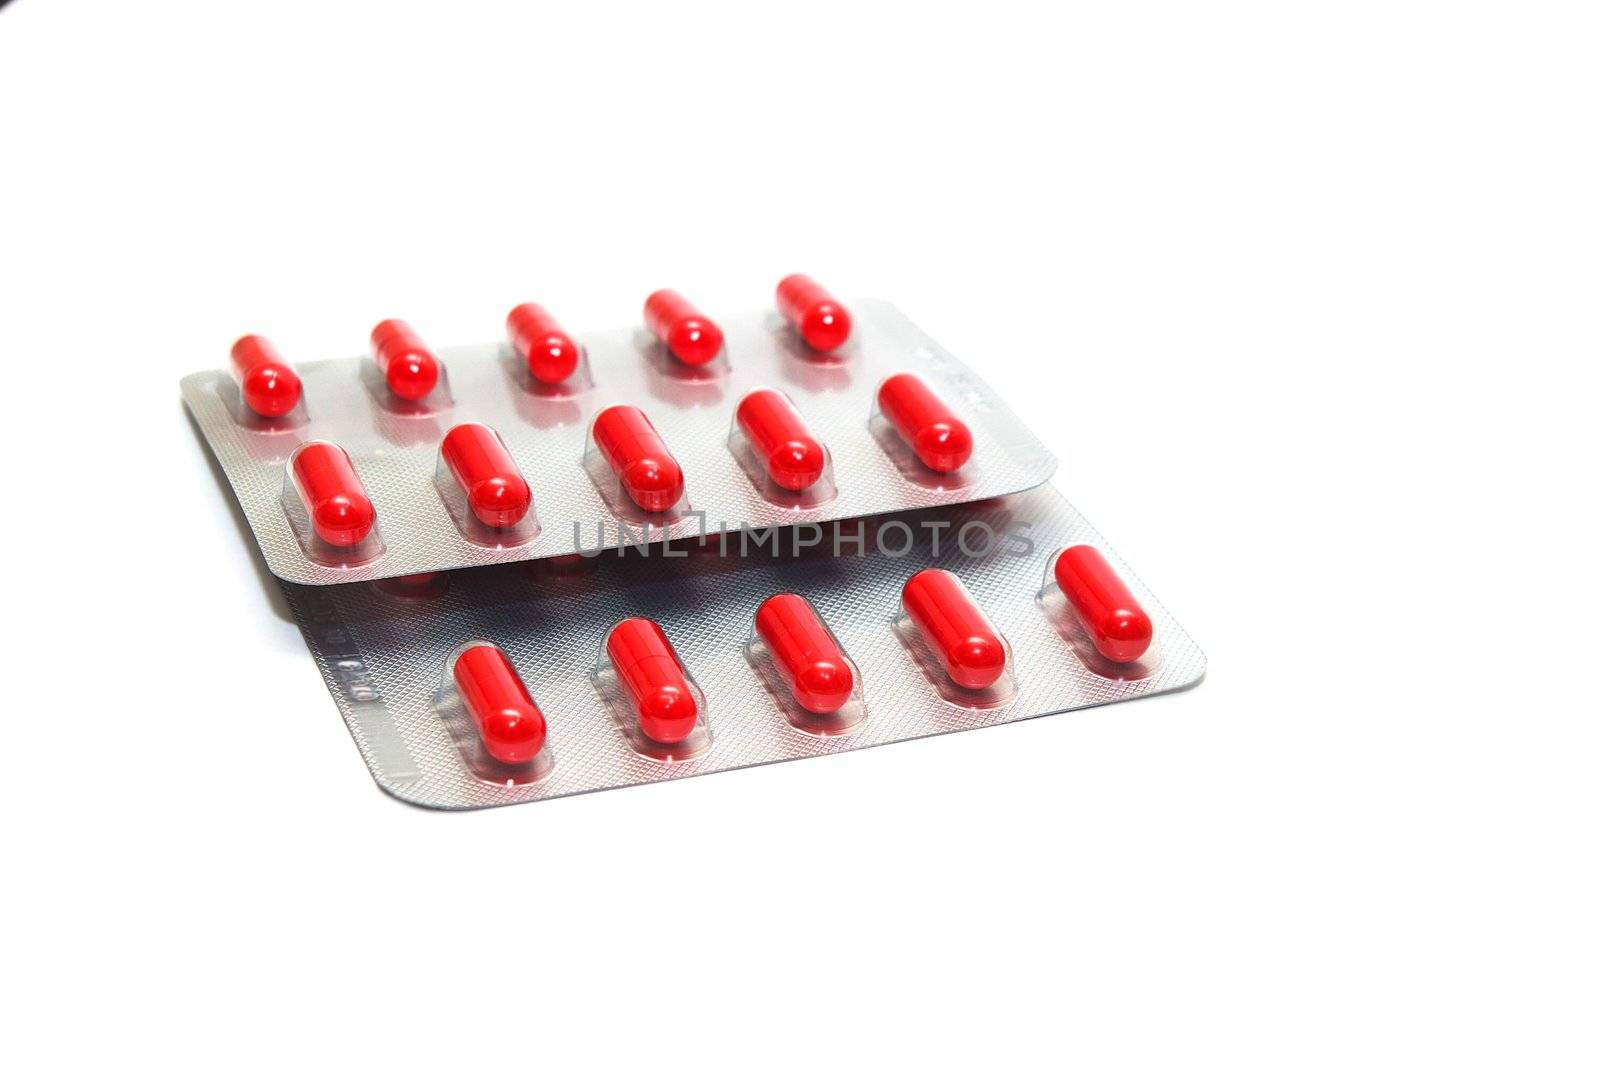 photo of the packings of pills on white background